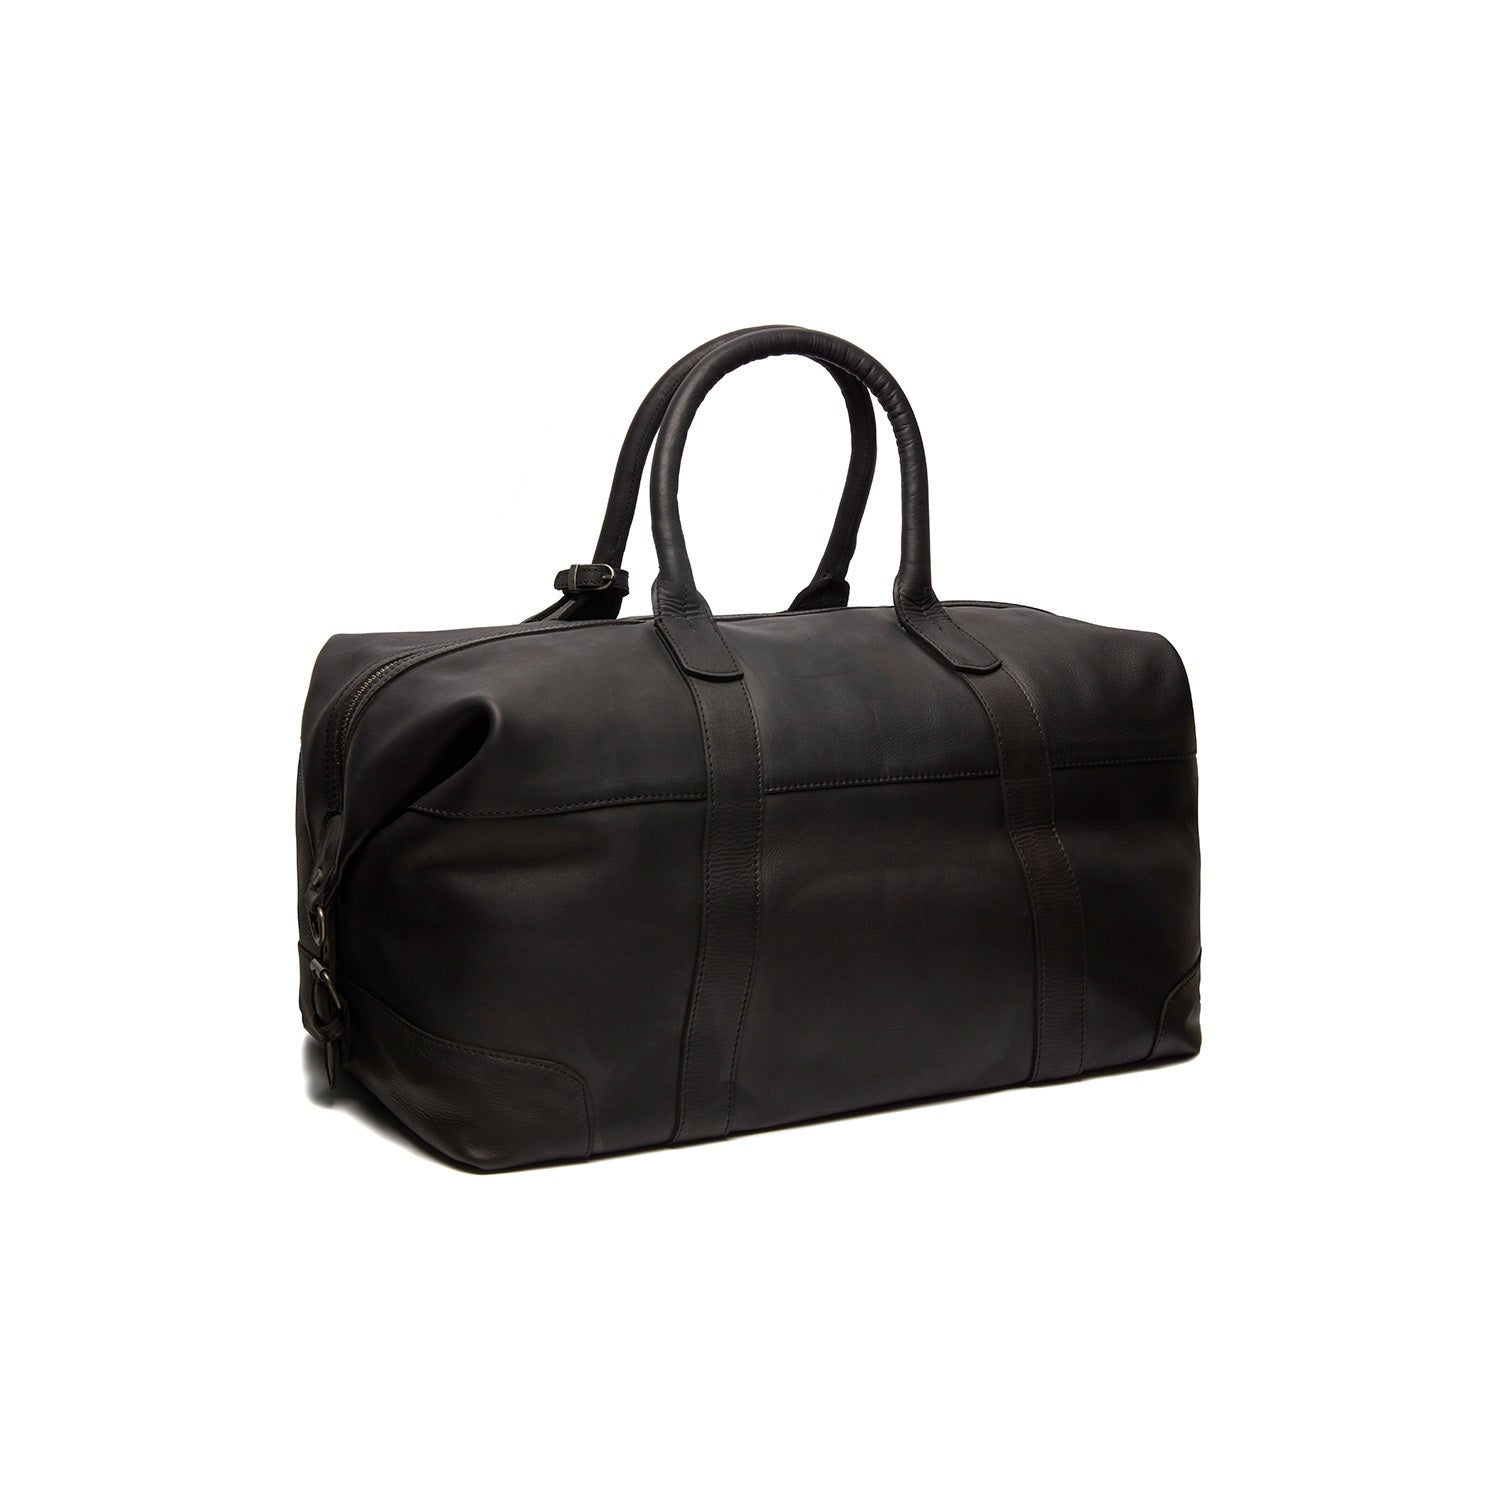 Leather Weekend Bag - The Chesterfield Brand Portsmouth Black